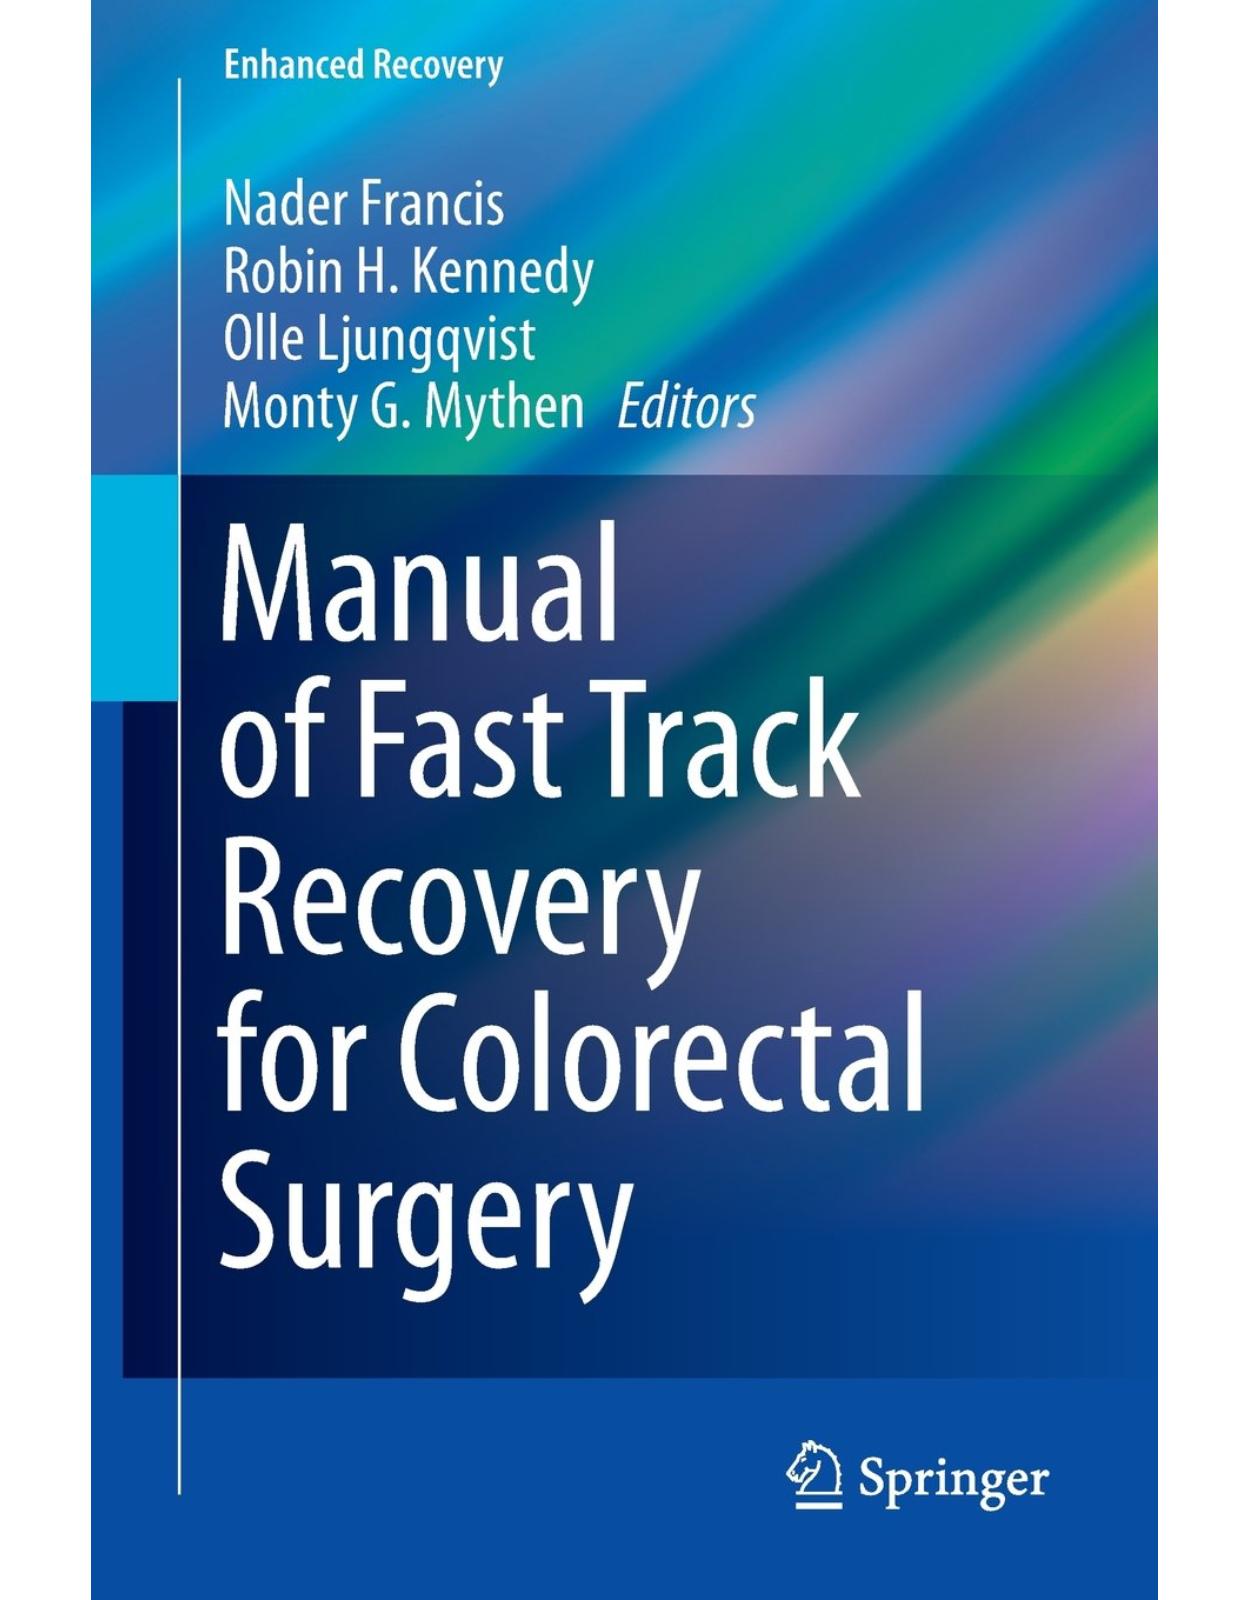 Manual of Fast Track Recovery for Colorectal Surgery (Enhanced Recovery)